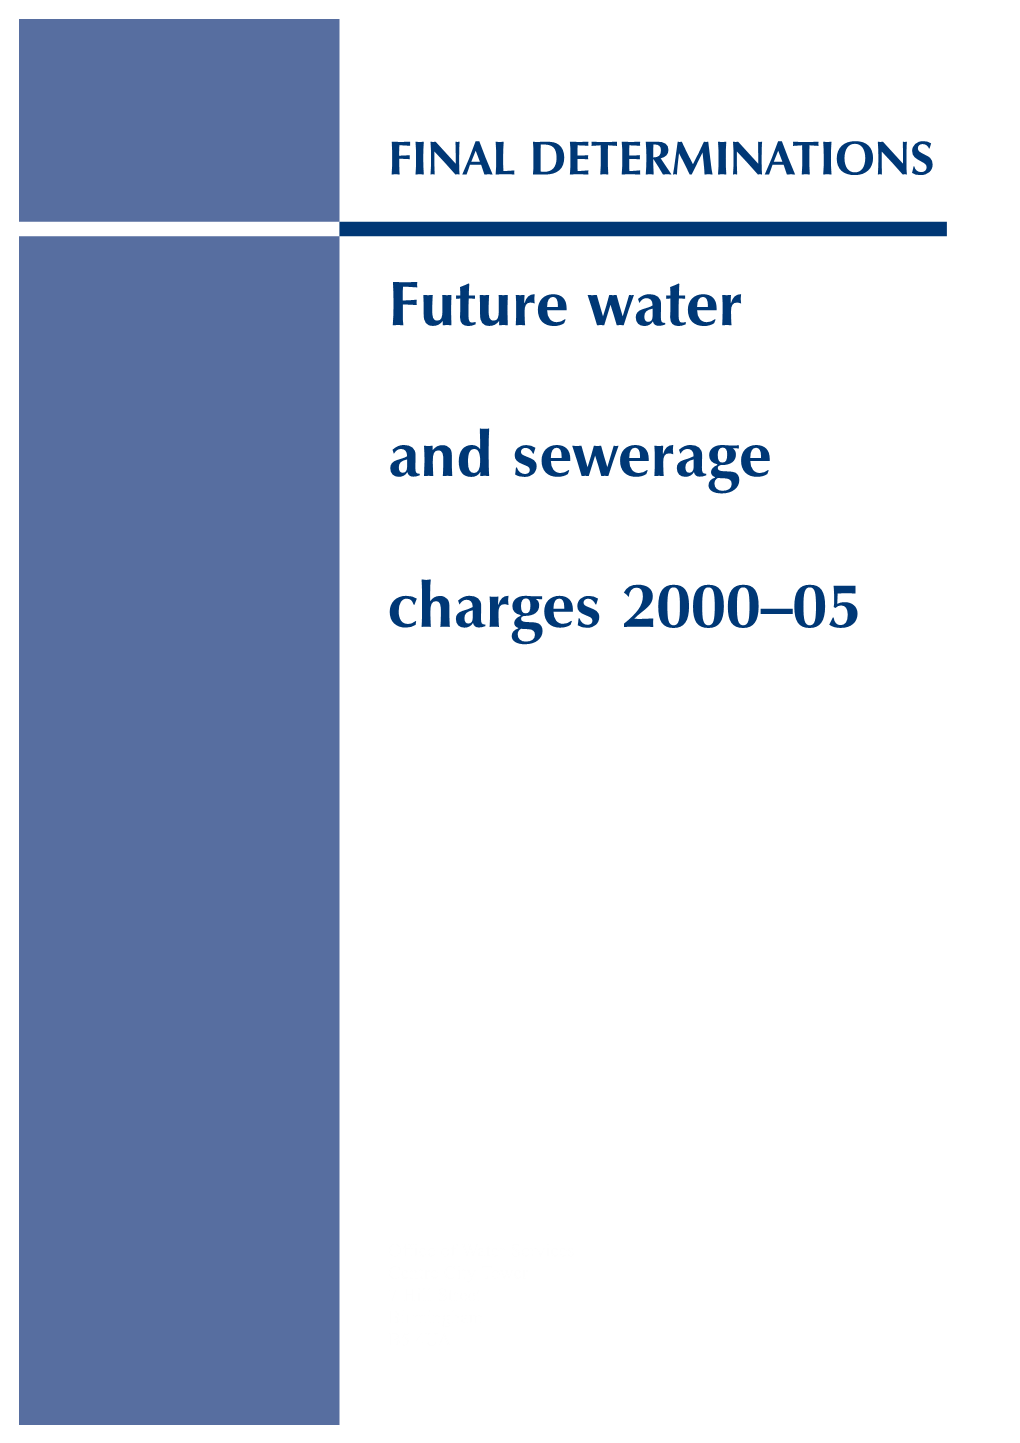 Final Determinations. Future Water and Sewerage Charges 2000-05